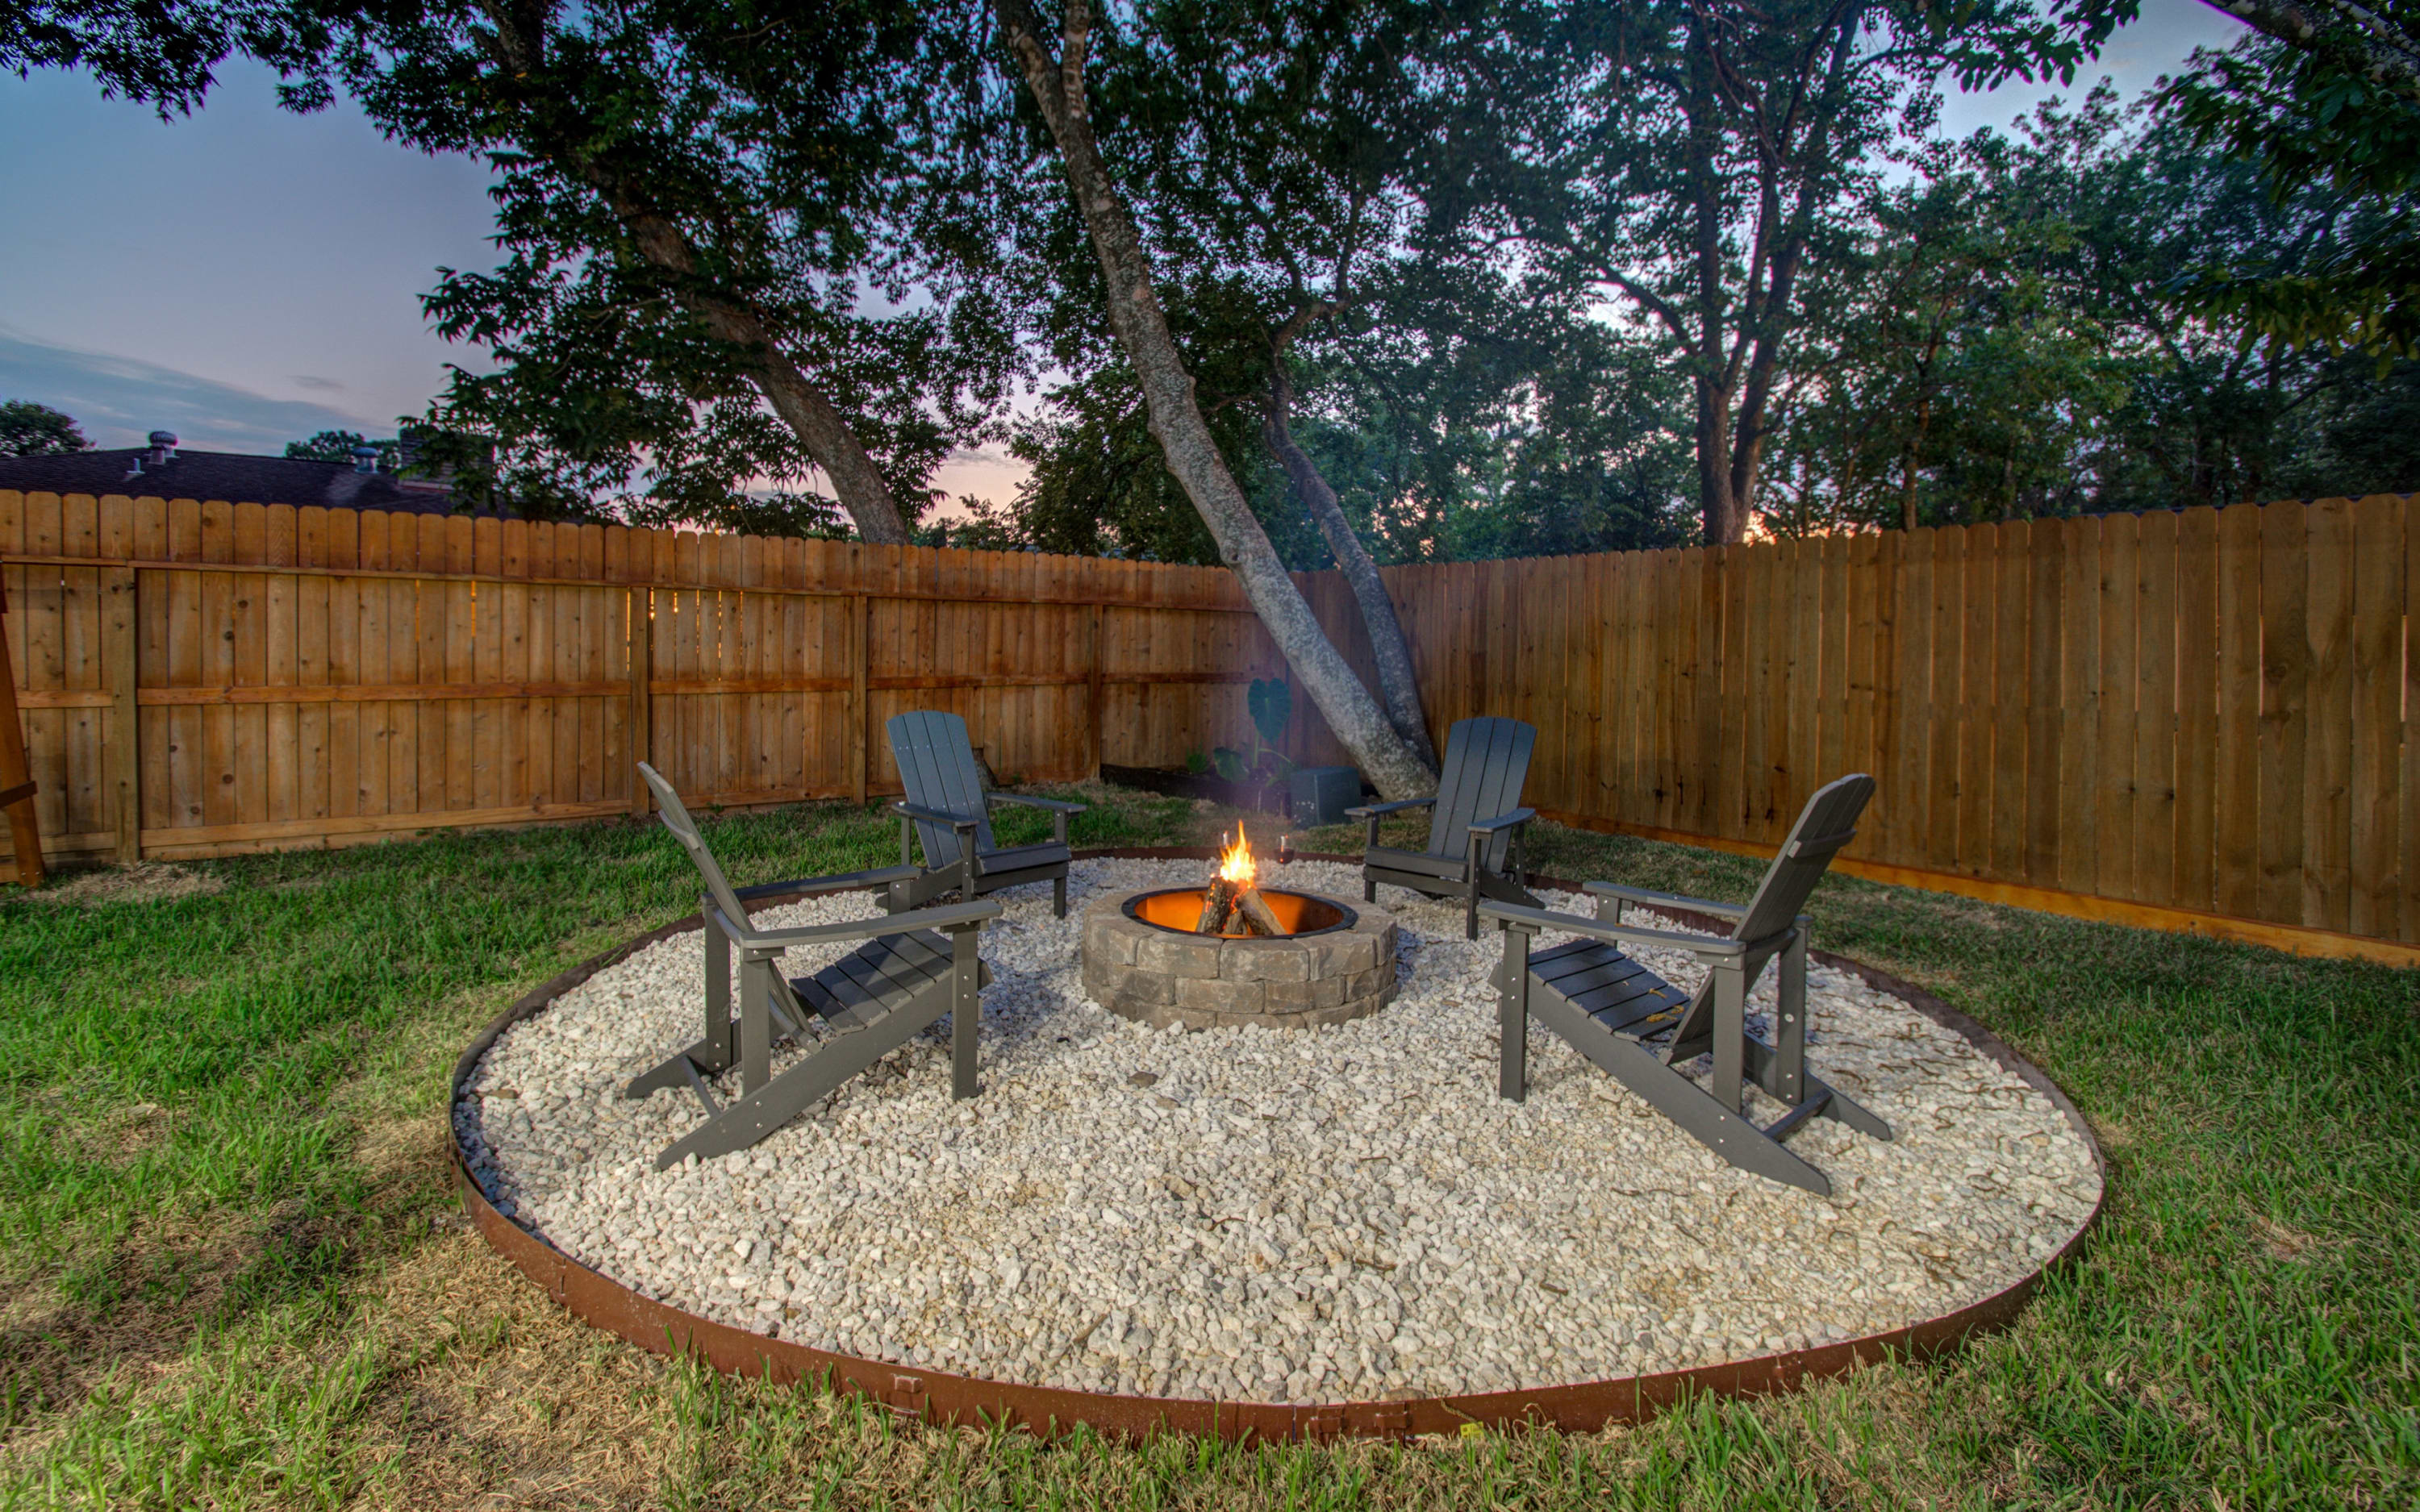 You can stay warm and cozy lounging around this fire pit as you continue your conversations late into the evening. 